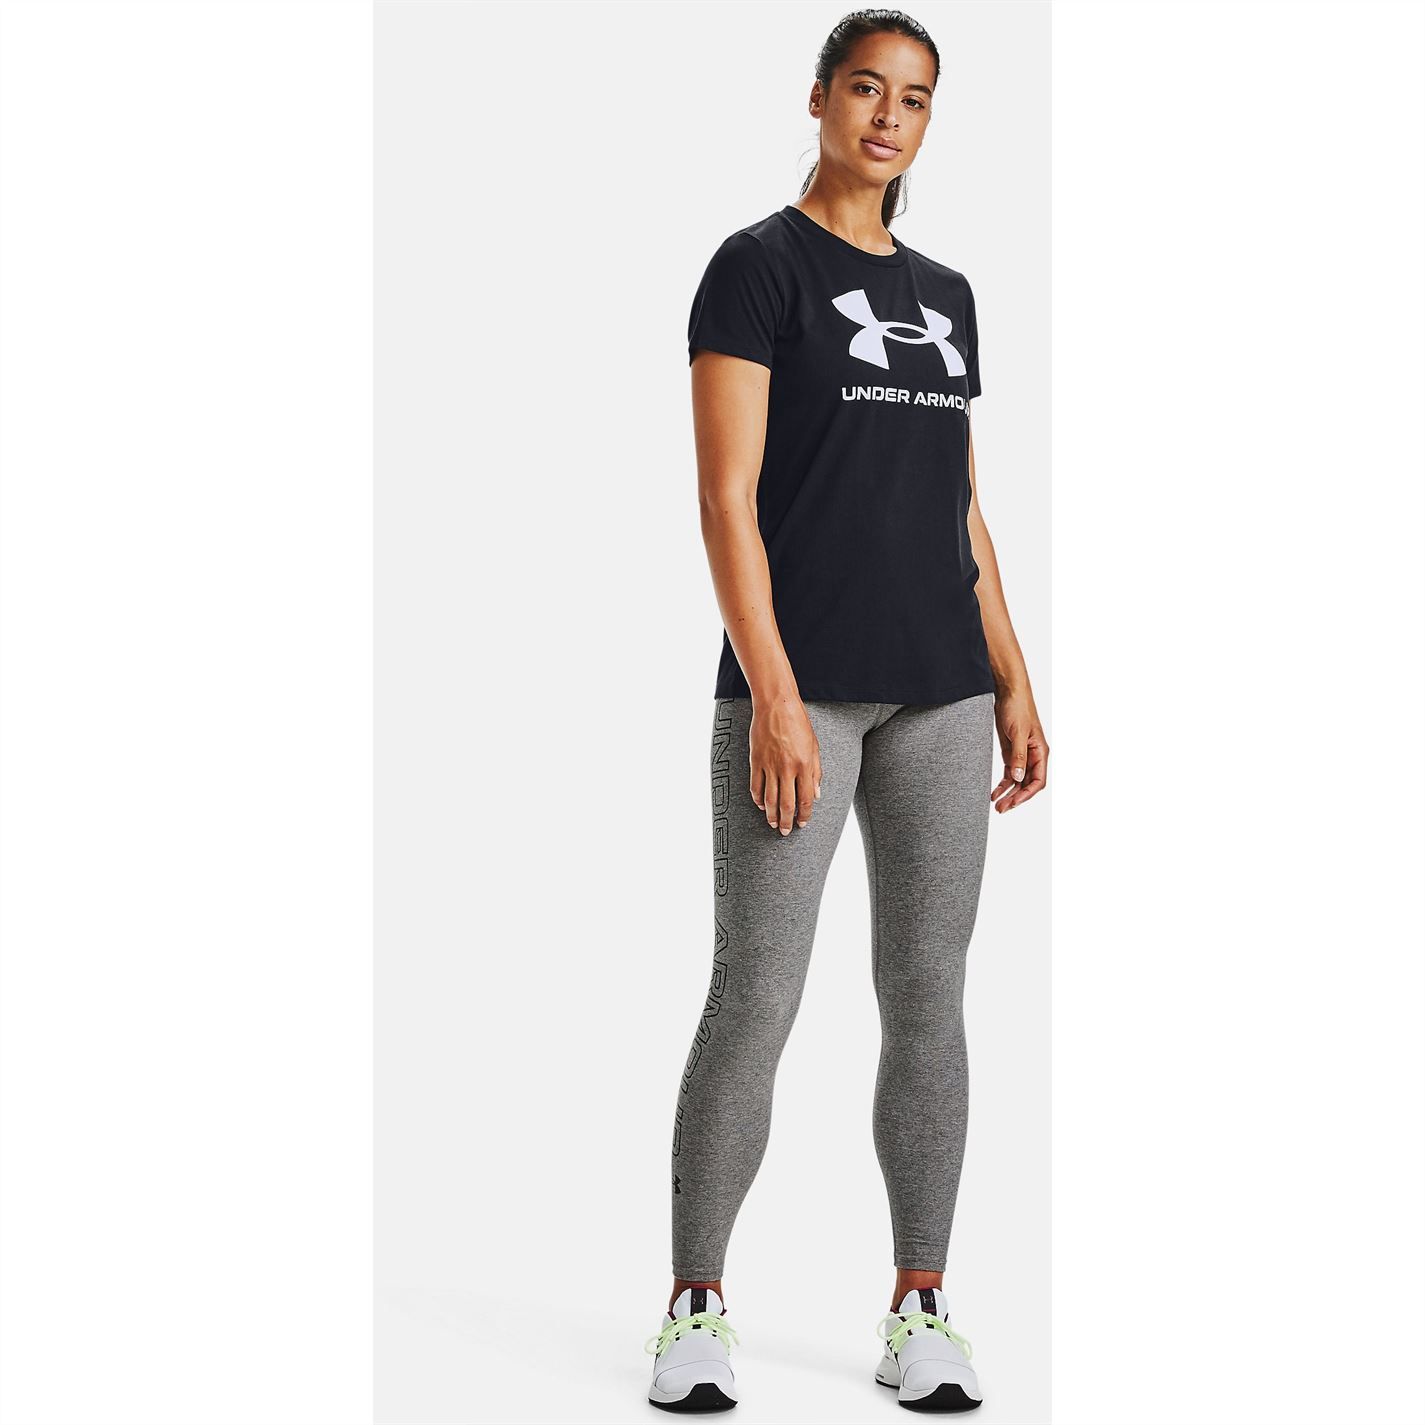 Under Armour Classic Crew T-Shirt Ladies - Upgrade your activewear or your casual wardrobe with this Under Armour Classic Crew T-Shirt which has been crafted using sweat-wicking fabric in order to keep your skin dry and your body cool as your push yourself during a workout. The tee is cut in a classic T-Shirt style with a crew neck and short sleeves, with the design dominated by the large print Under Armour branding across the chest.